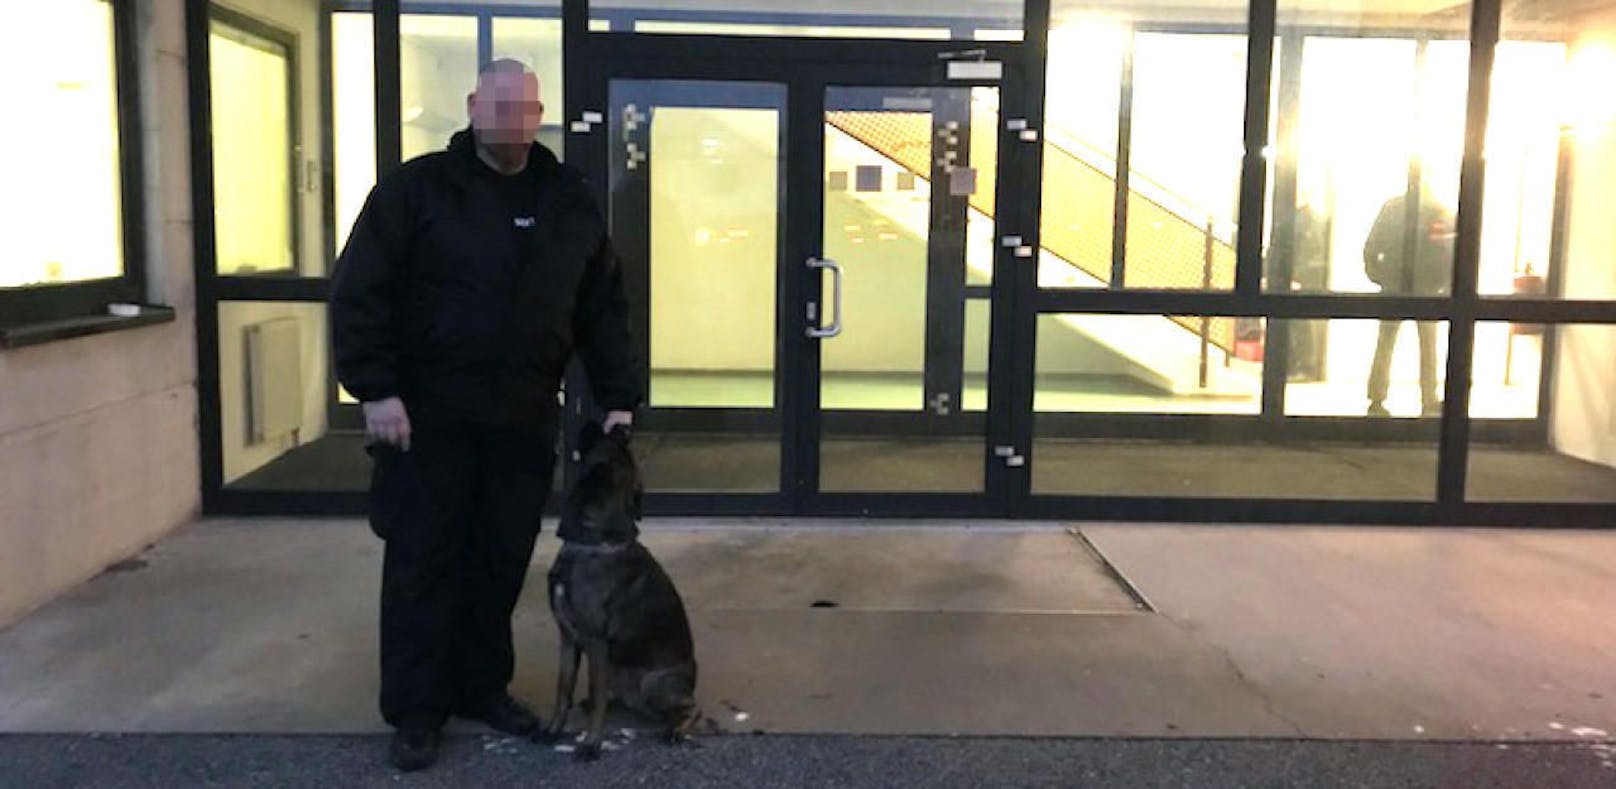 &quot;Straflager&quot; in Drasenhofer: Security mit Wachhund